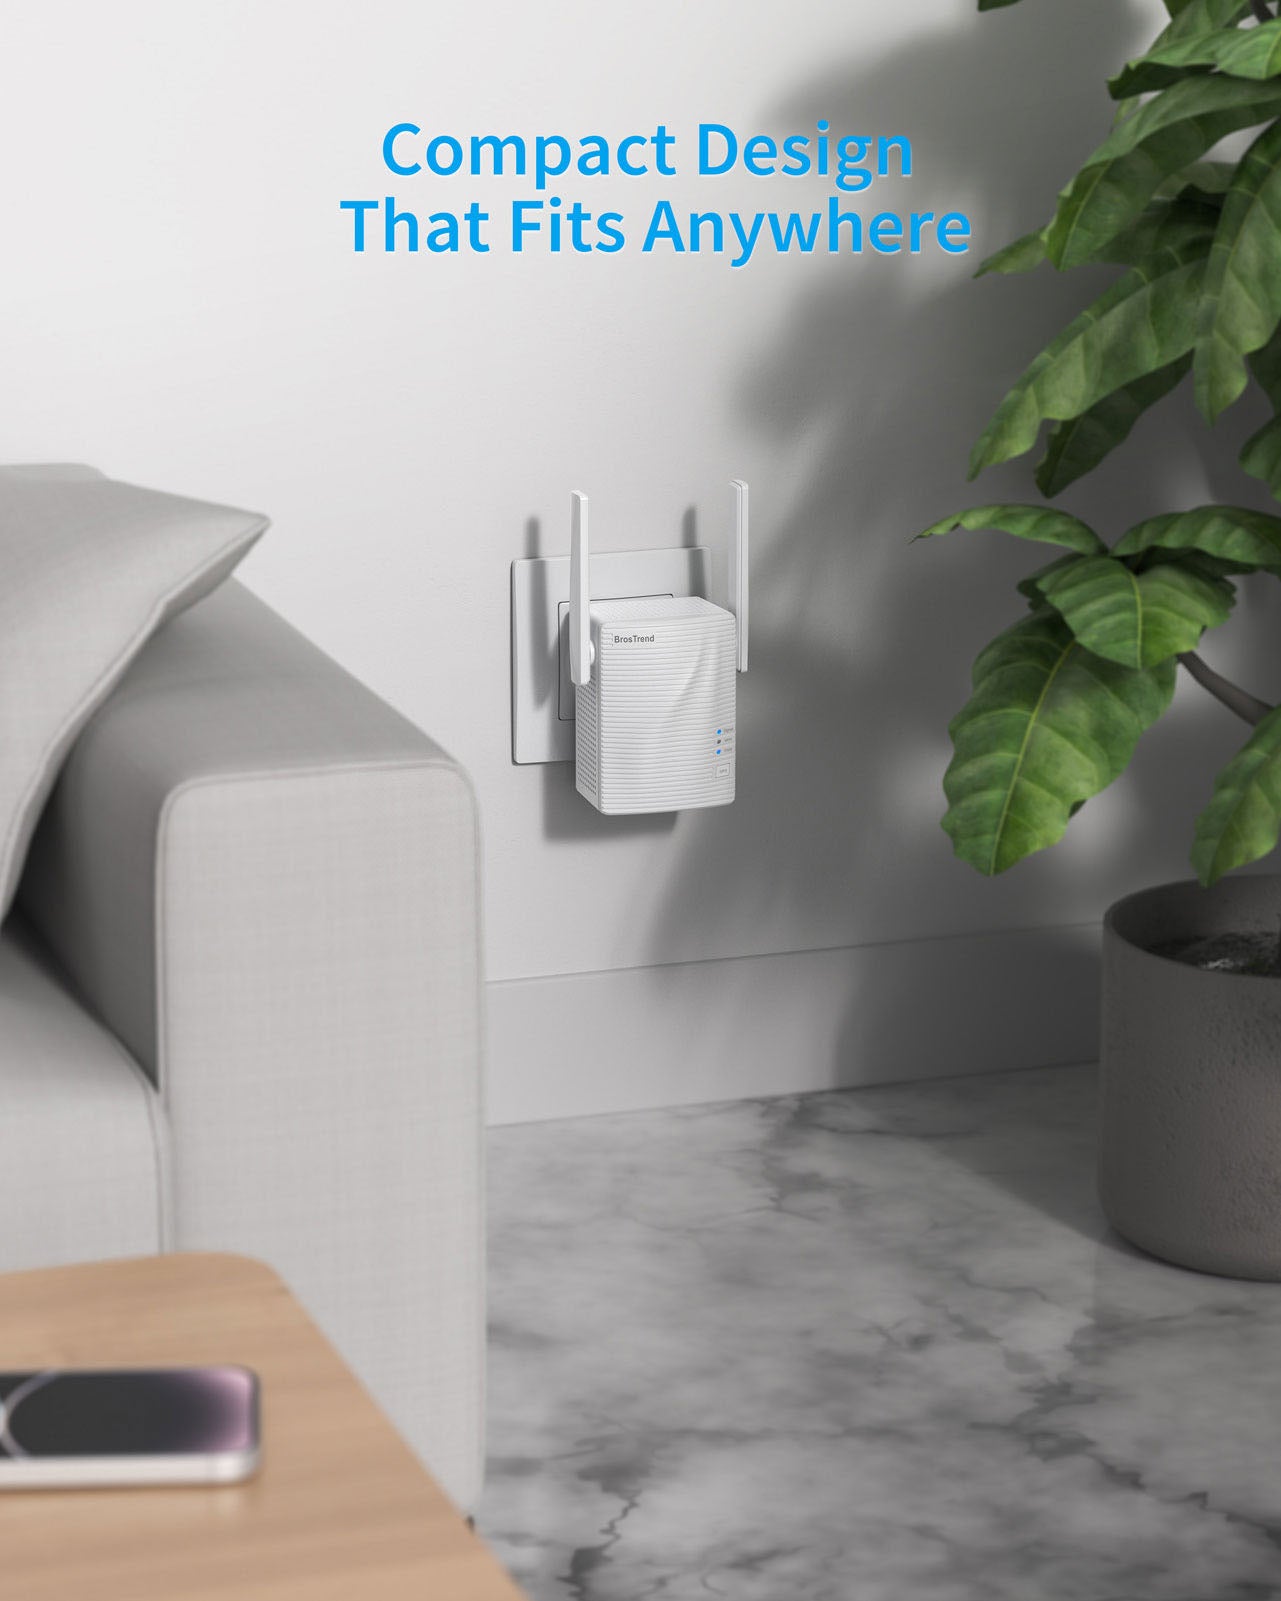 BrosTrend 1200Mbps WiFi Booster Blends into Your Home Décor with Compact Design